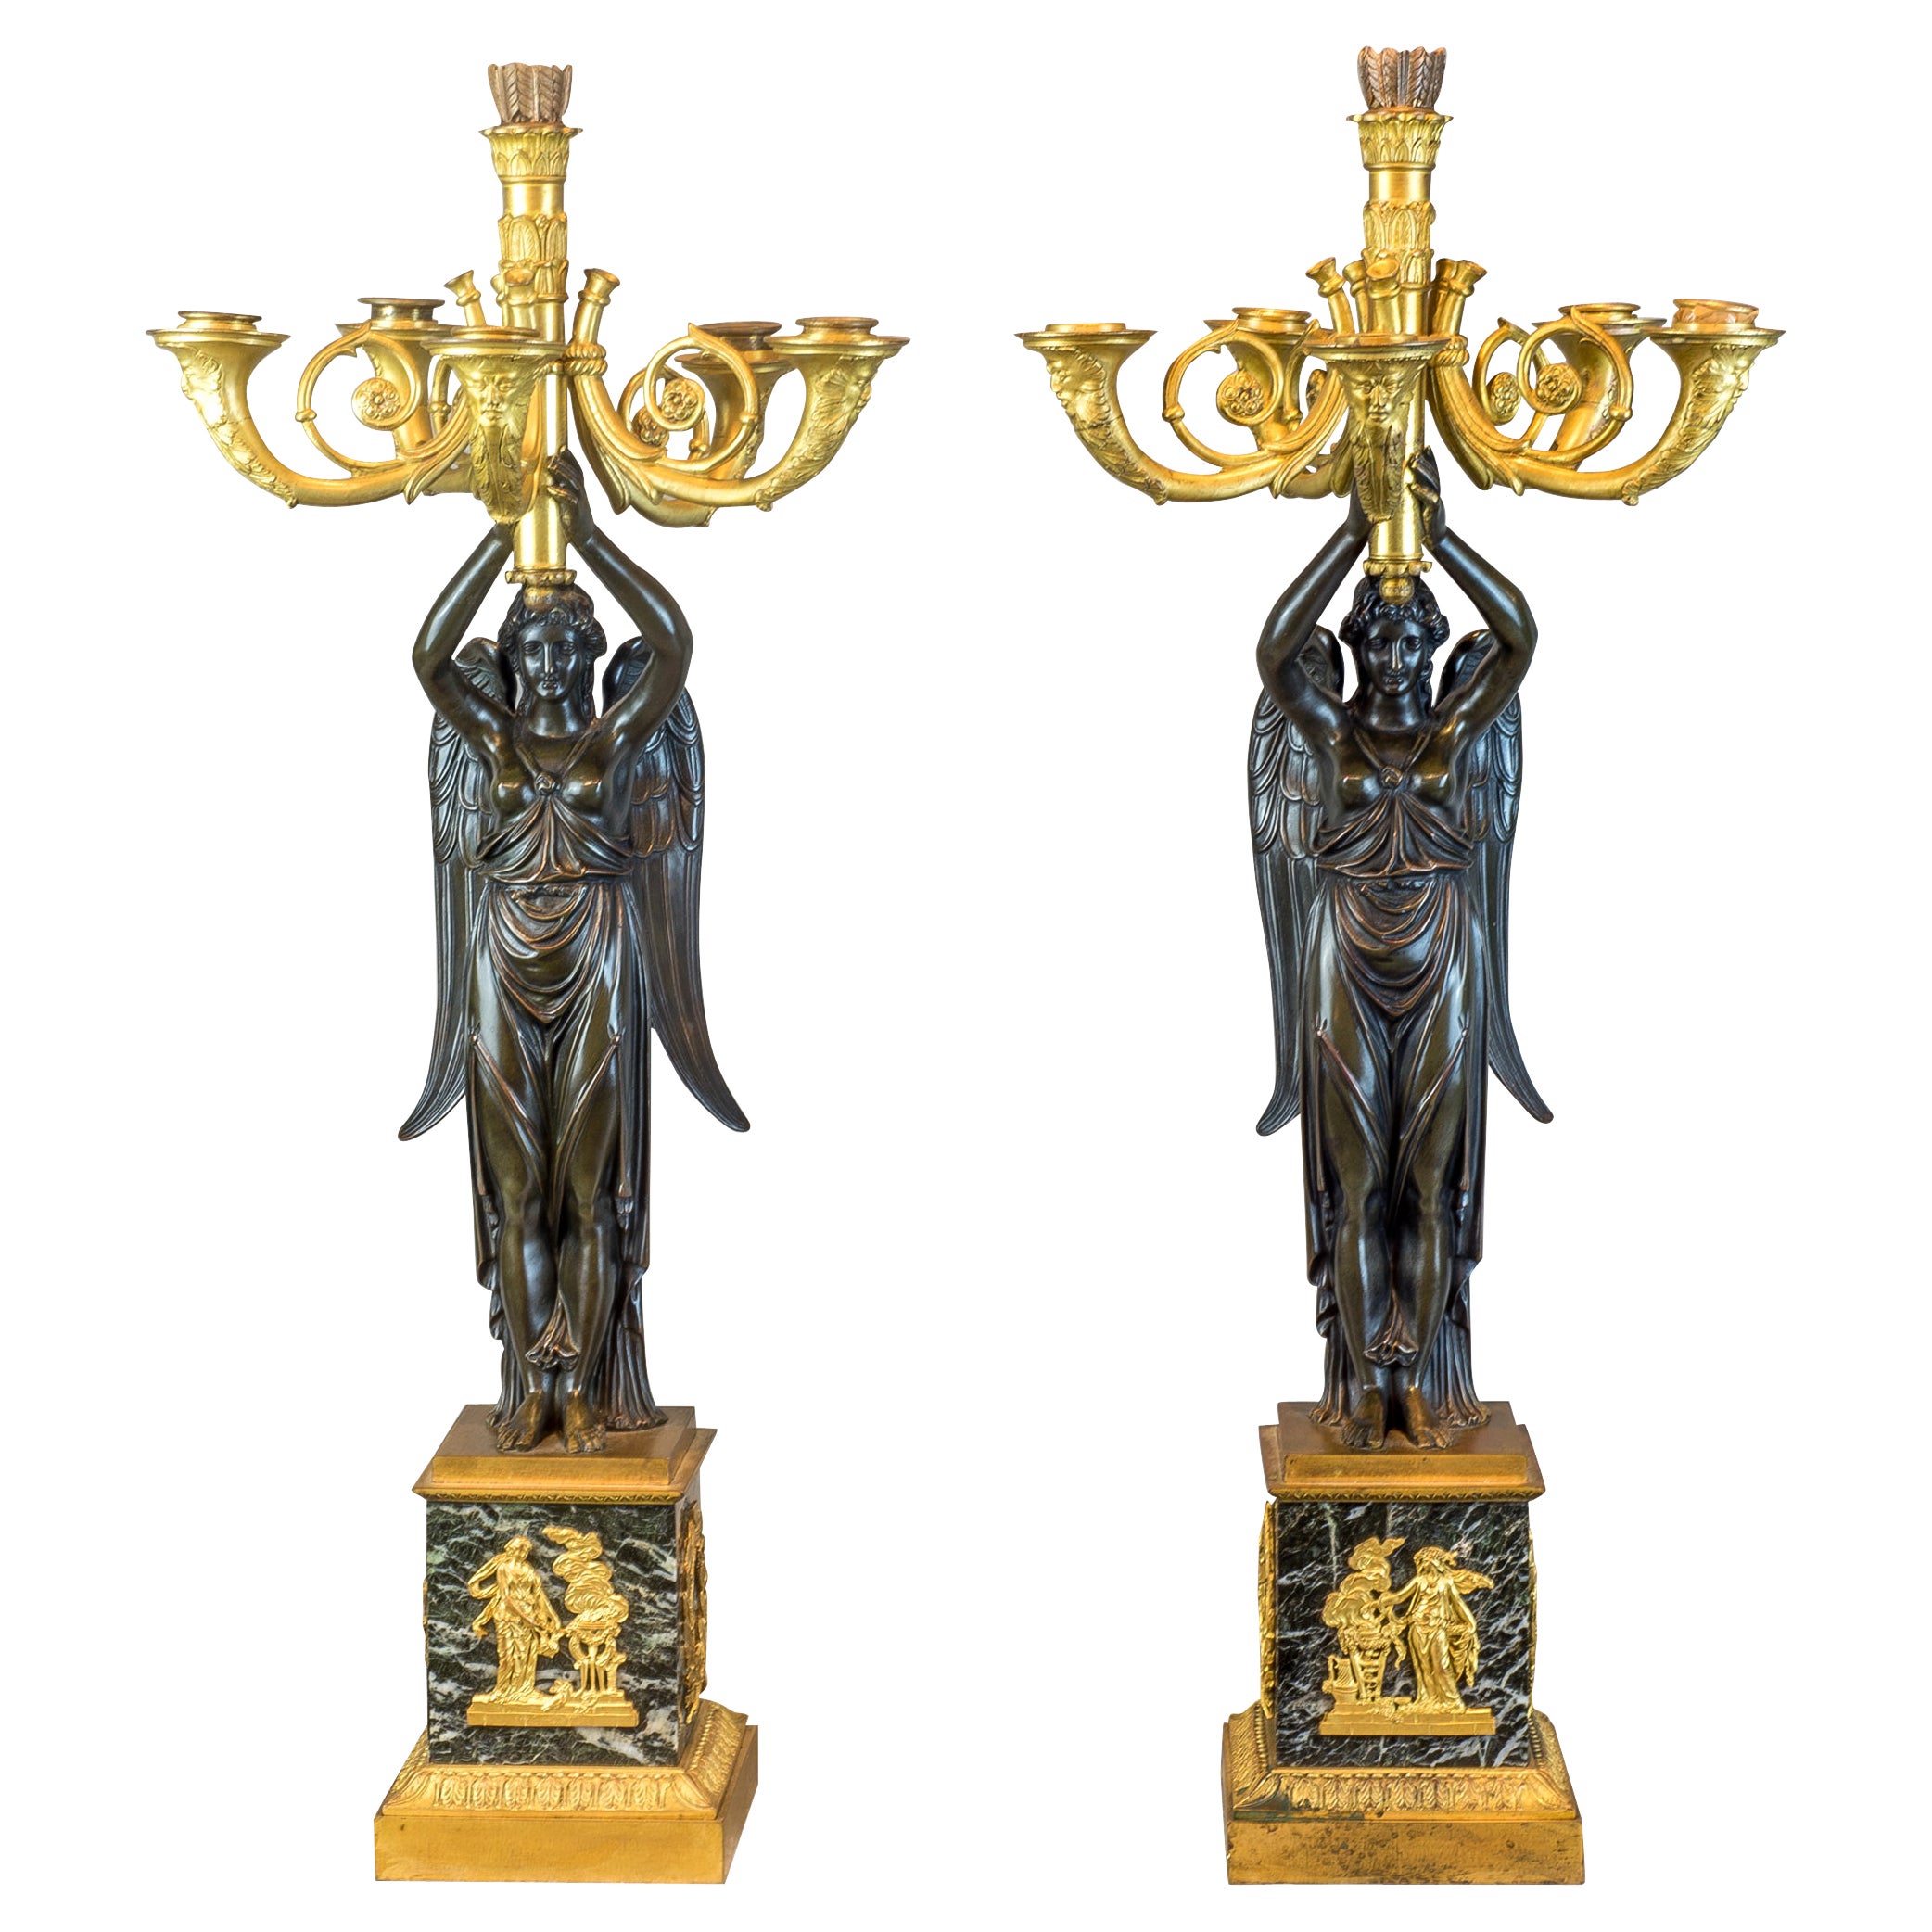  Pair of Empire Gilt and Patinated Bronze Six-Light Figural Candelabras